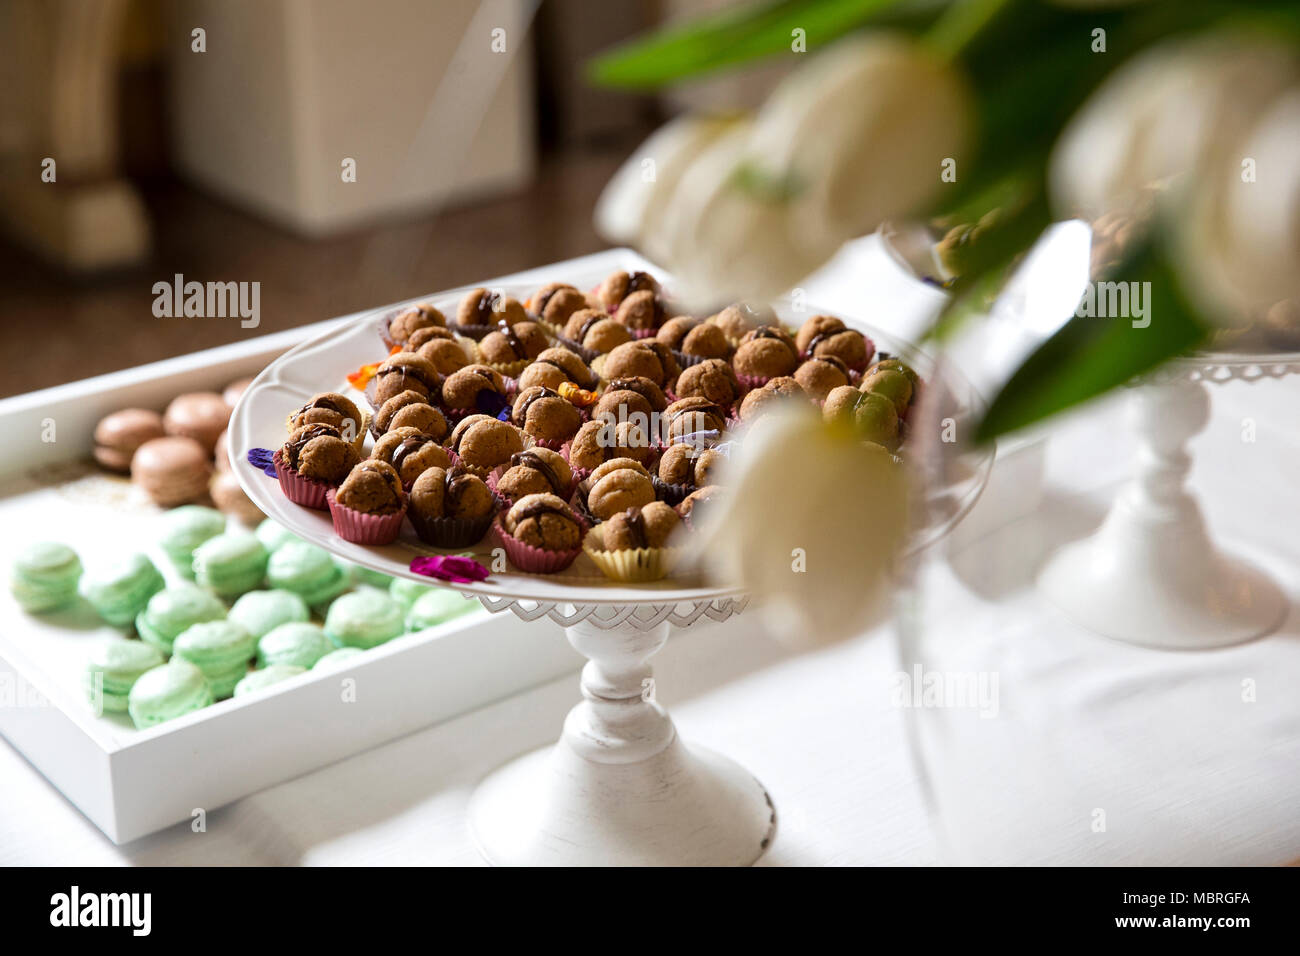 closeup of a wedding buffet. dry chocolate and halzenut pastries on a vintage metal riser Stock Photo